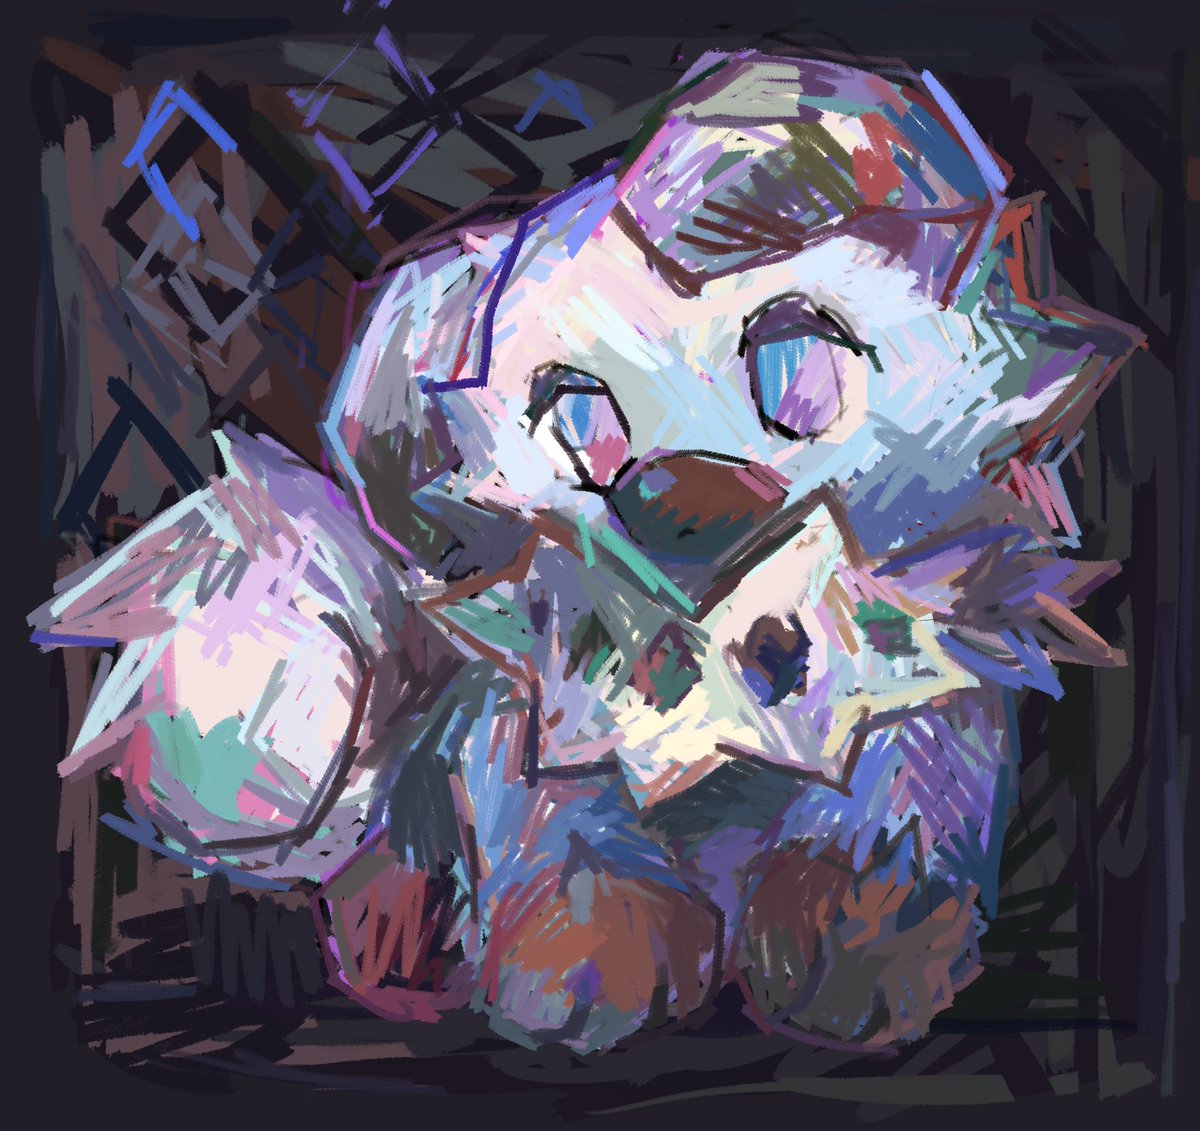 Rockruff, requested by a patron